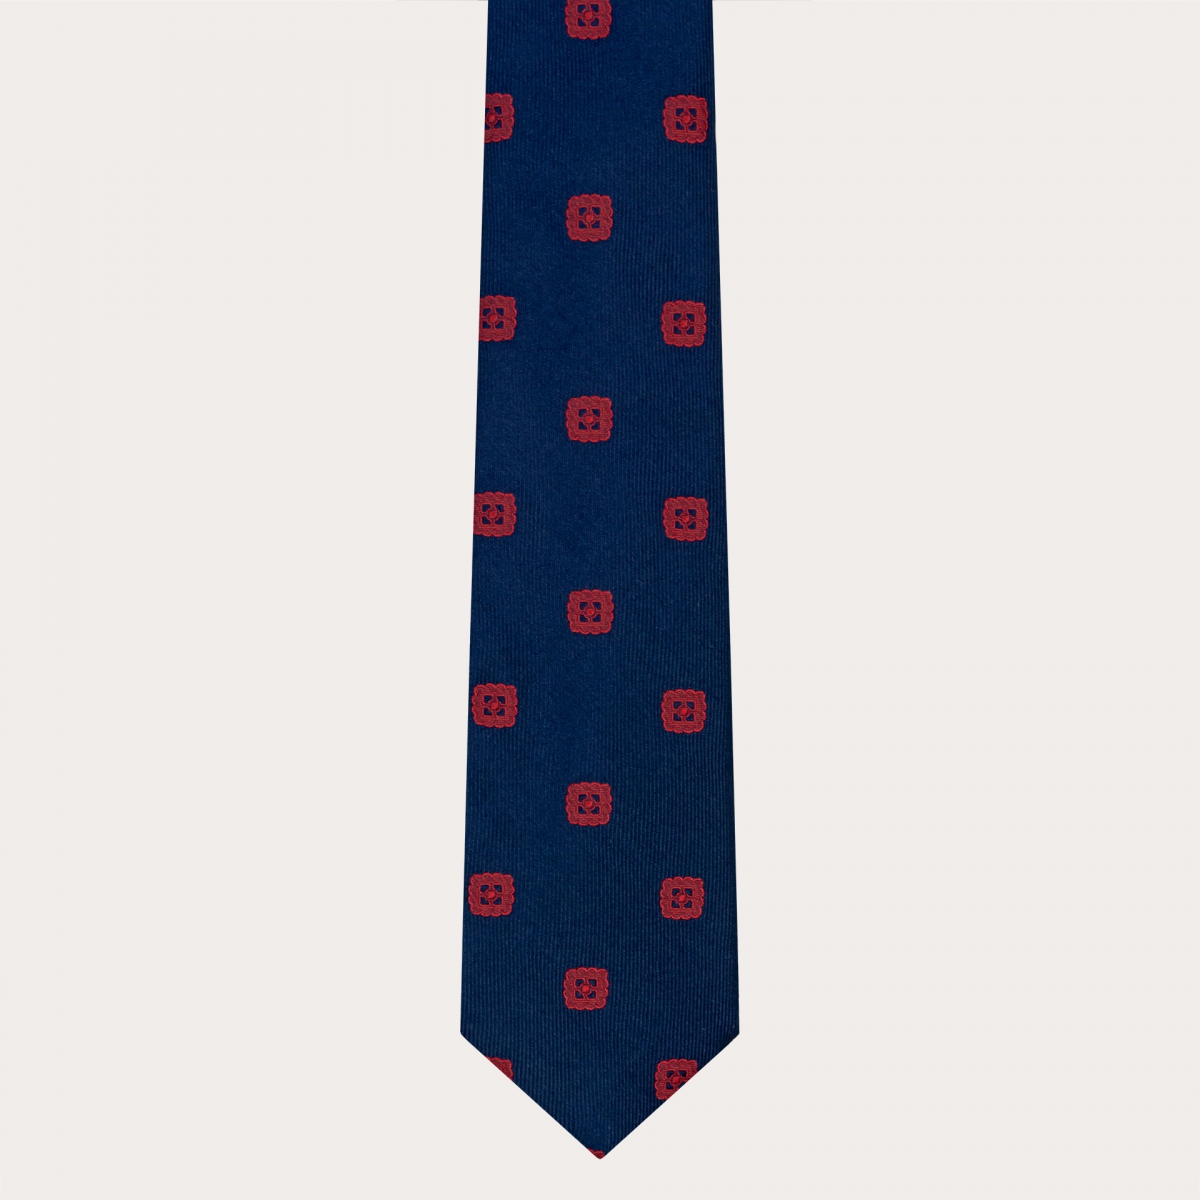 Elegant necktie in jacquard silk, blue with red embroidery